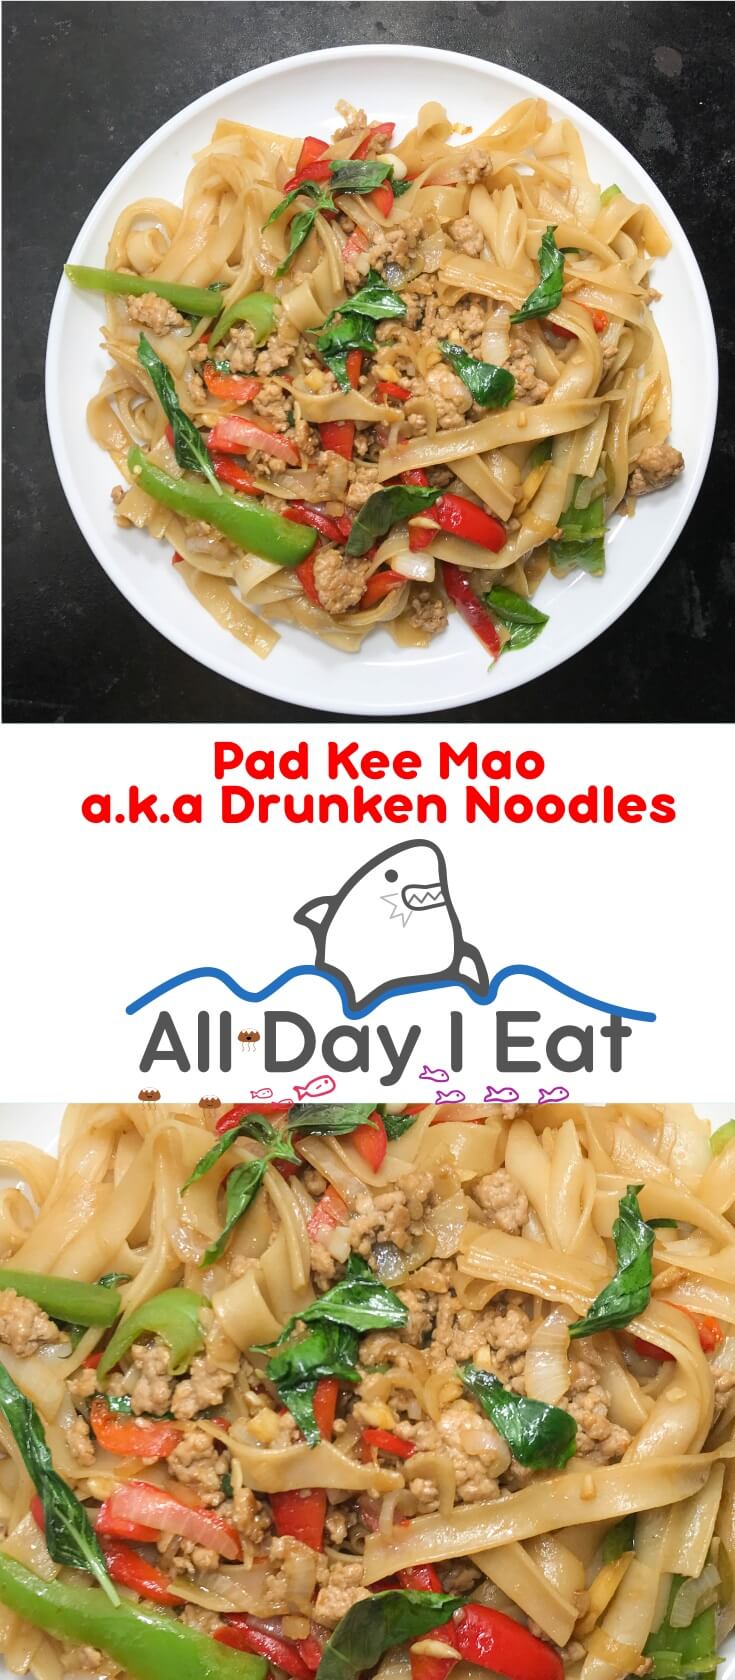 Pad Kee Mao a.k.a drunken noodles! One of the tastiest and most comforting Thai Stir Frys you can make, and it's super easy!! | www.alldayieat.com